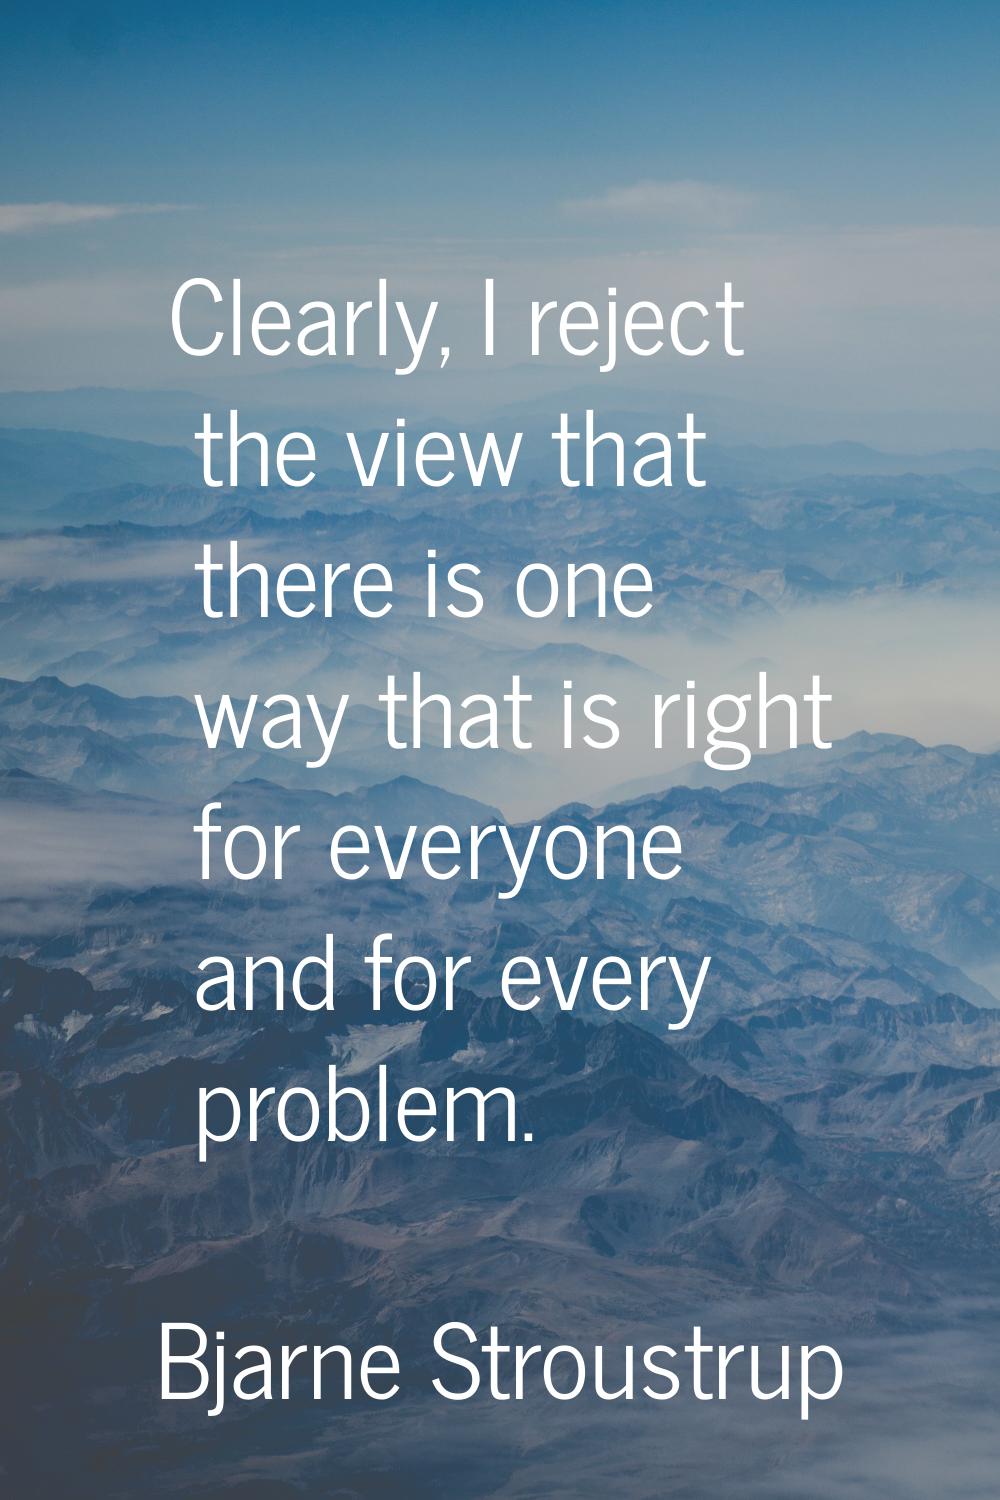 Clearly, I reject the view that there is one way that is right for everyone and for every problem.